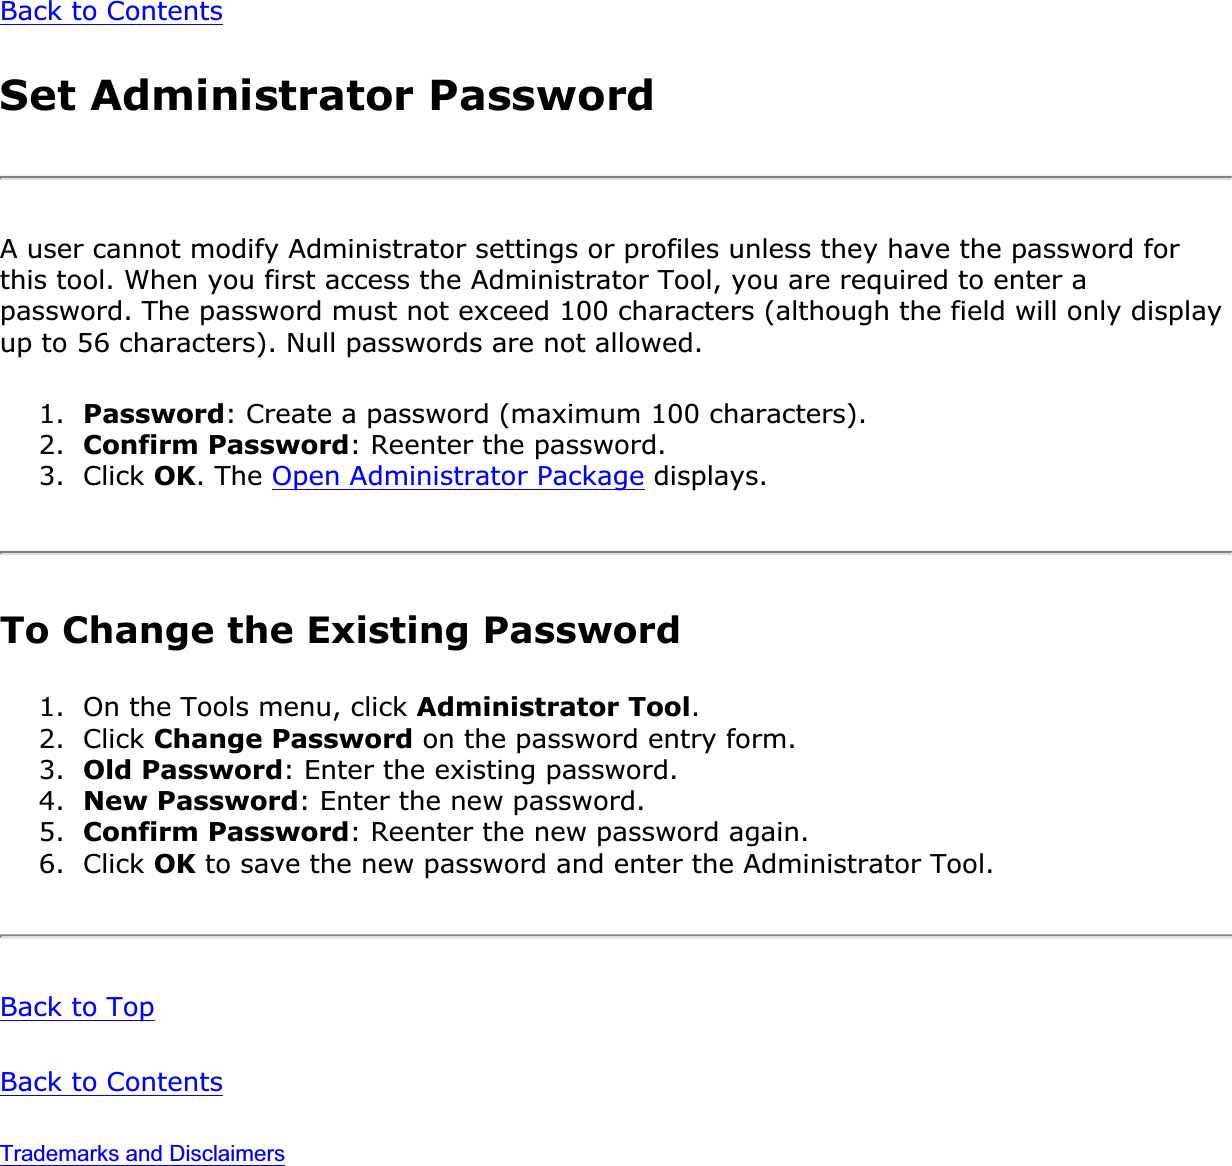 Back to ContentsSet Administrator PasswordA user cannot modify Administrator settings or profiles unless they have the password for this tool. When you first access the Administrator Tool, you are required to enter a password. The password must not exceed 100 characters (although the field will only display up to 56 characters). Null passwords are not allowed.1. Password: Create a password (maximum 100 characters).2. Confirm Password: Reenter the password.3. Click OK. The Open Administrator Package displays.To Change the Existing Password1. On the Tools menu, click Administrator Tool.2. Click Change Password on the password entry form.3. Old Password: Enter the existing password.4. New Password: Enter the new password.5. Confirm Password: Reenter the new password again.6. Click OK to save the new password and enter the Administrator Tool.Back to TopBack to ContentsTrademarks and Disclaimers